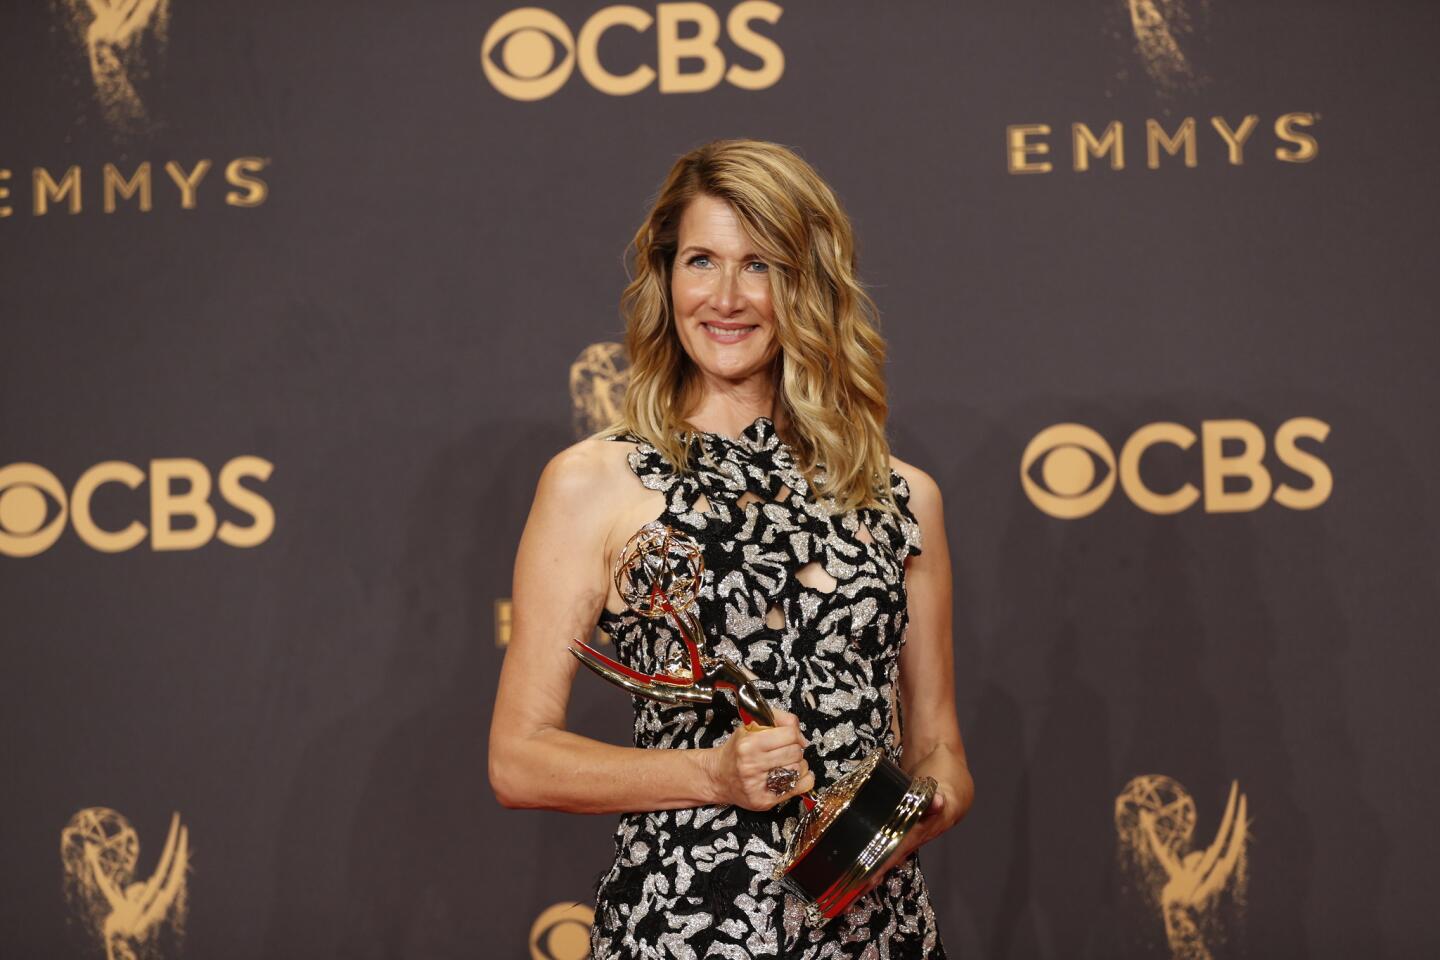 Laura Dern with her Emmy for supporting actress in a limited series or movie for "Big Little Lies."